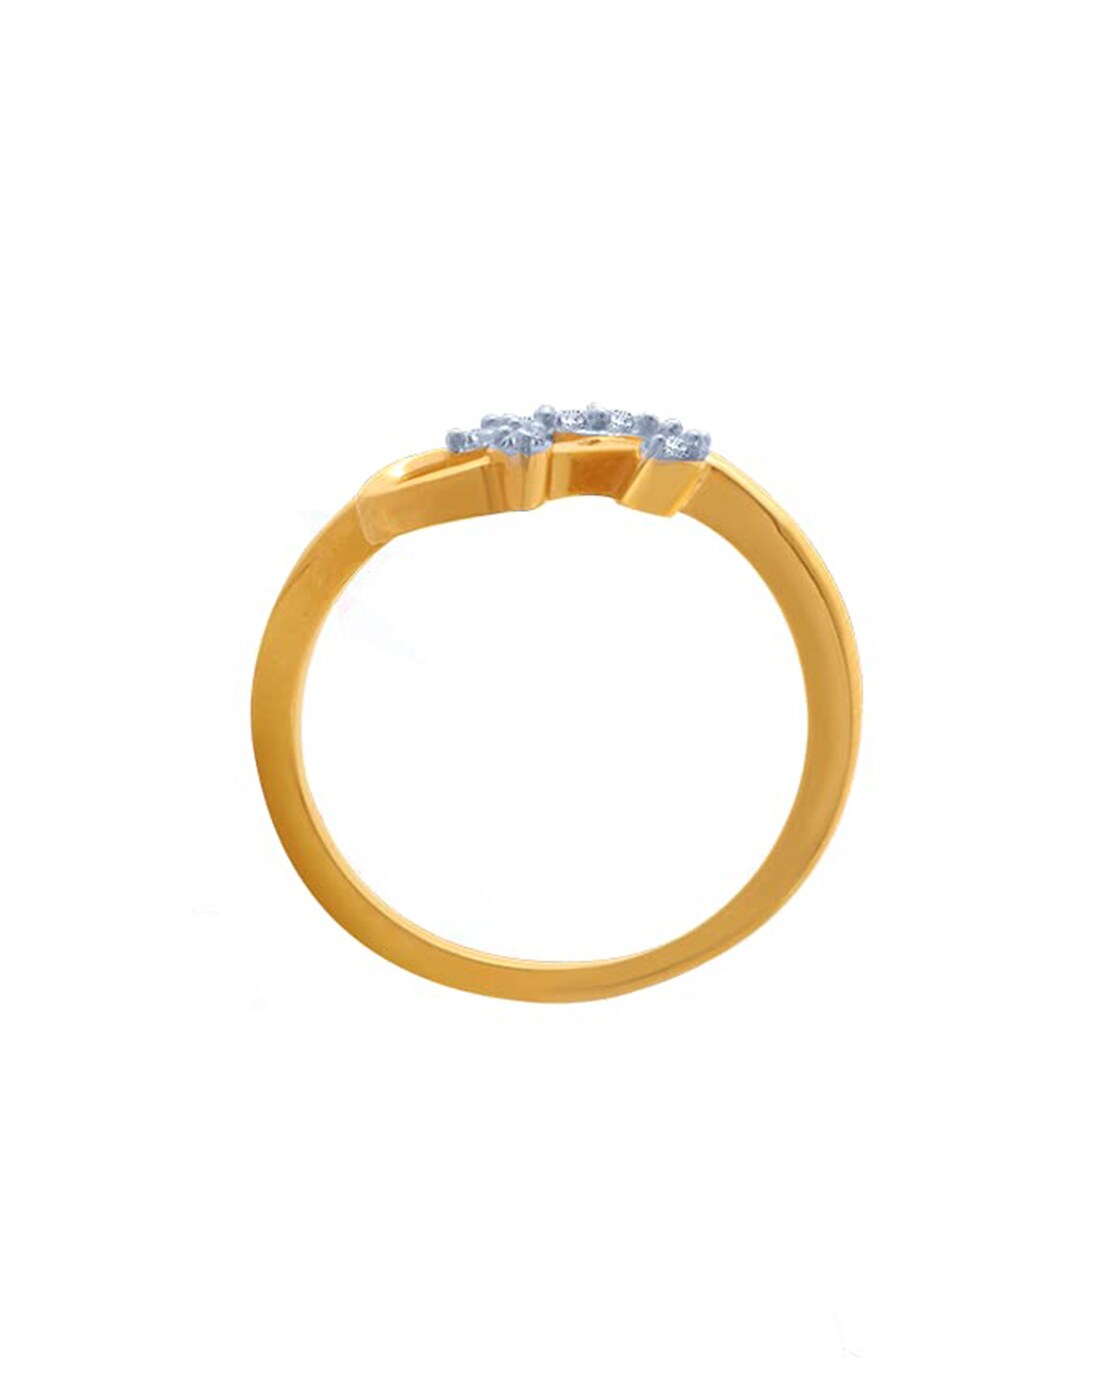 PC Chandra Jewellers Floral Design 14kt Yellow Gold ring Price in India -  Buy PC Chandra Jewellers Floral Design 14kt Yellow Gold ring online at  Flipkart.com